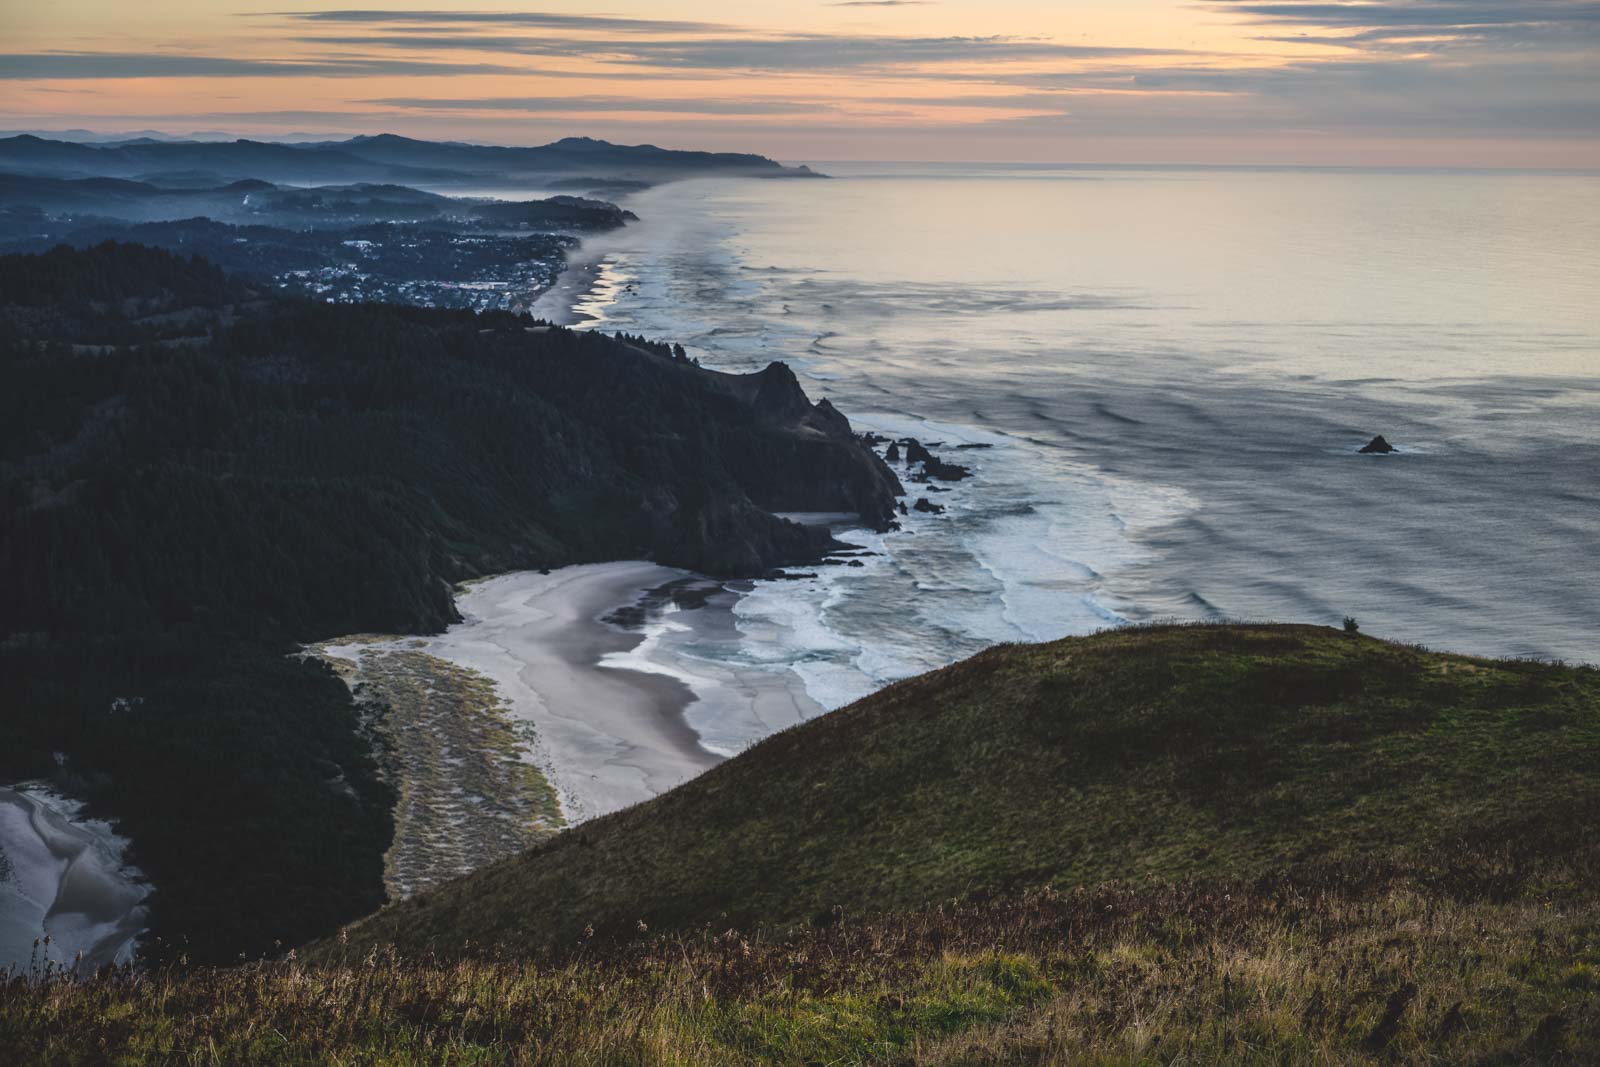 Ocean view from the Cascade Head Trail at sunset.